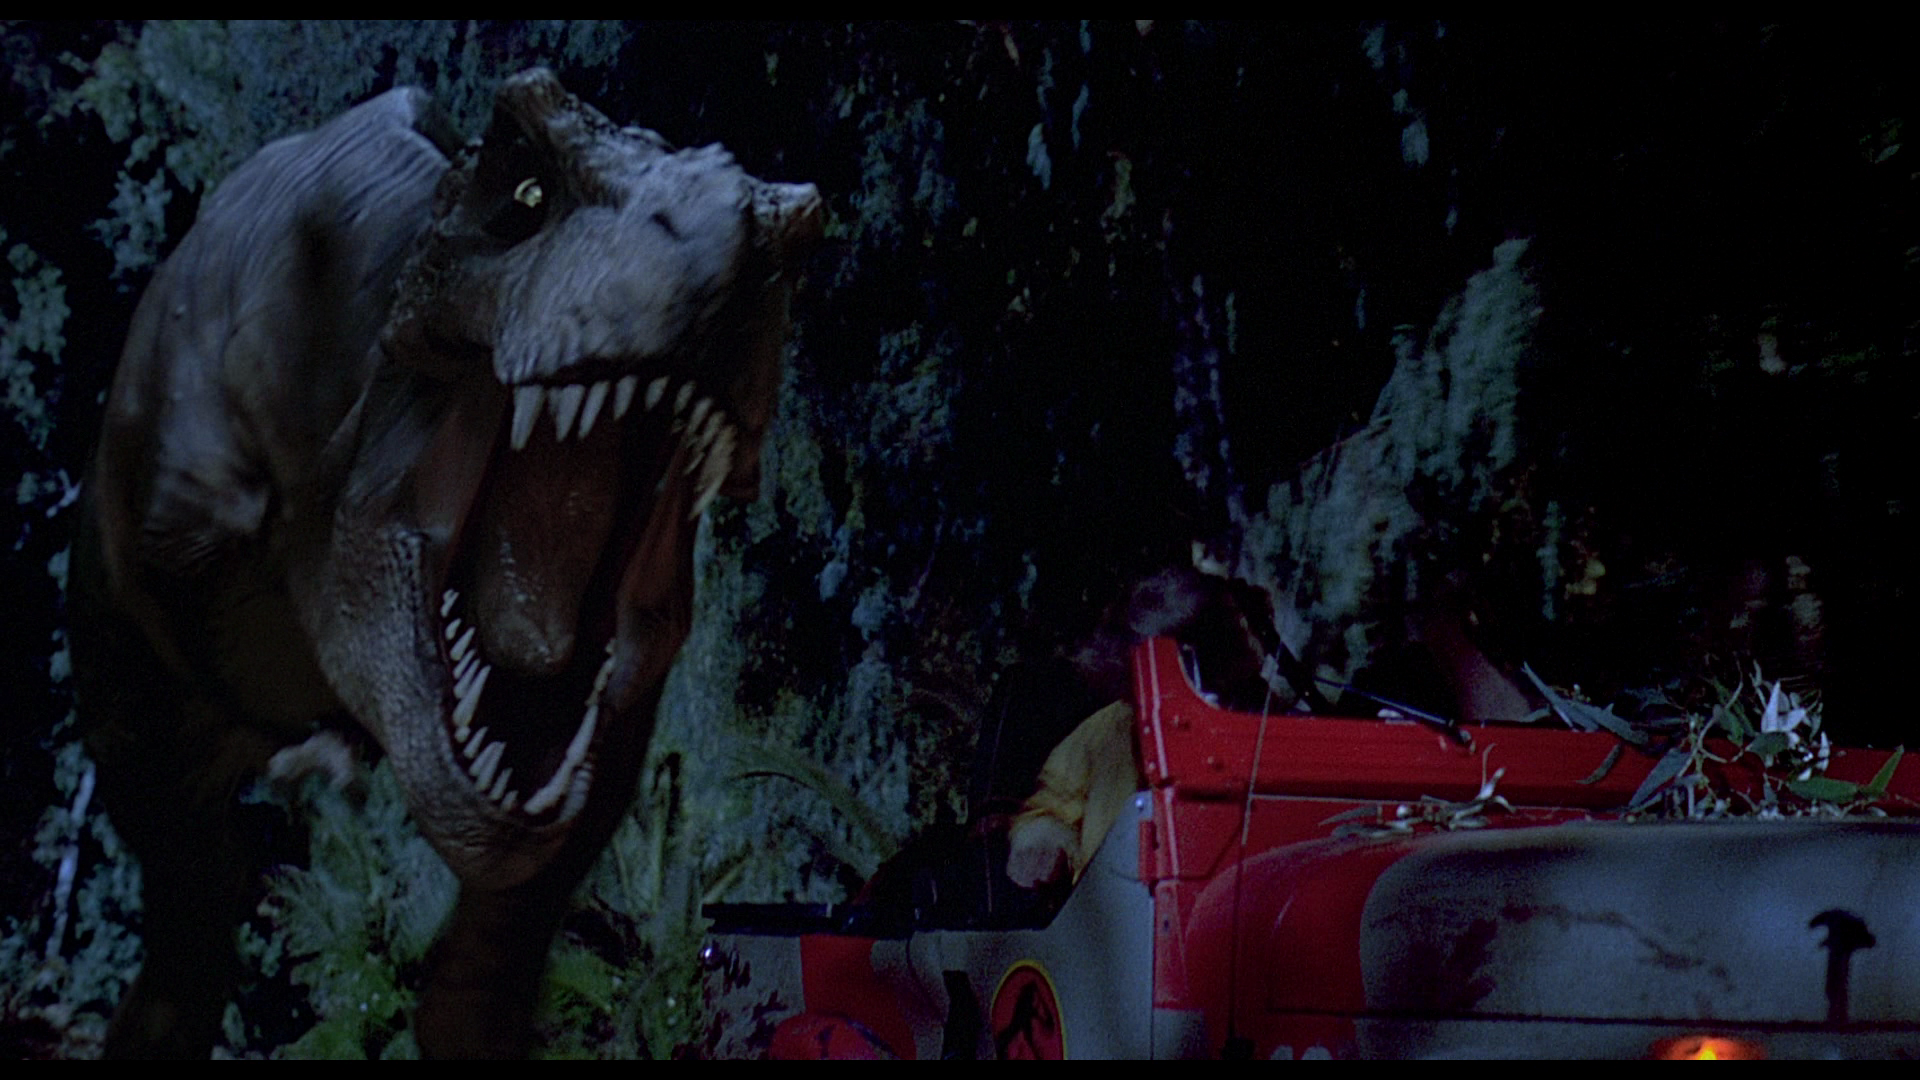 Jurassic_park_t_rex_chasing_jeep.png (1920×1080)